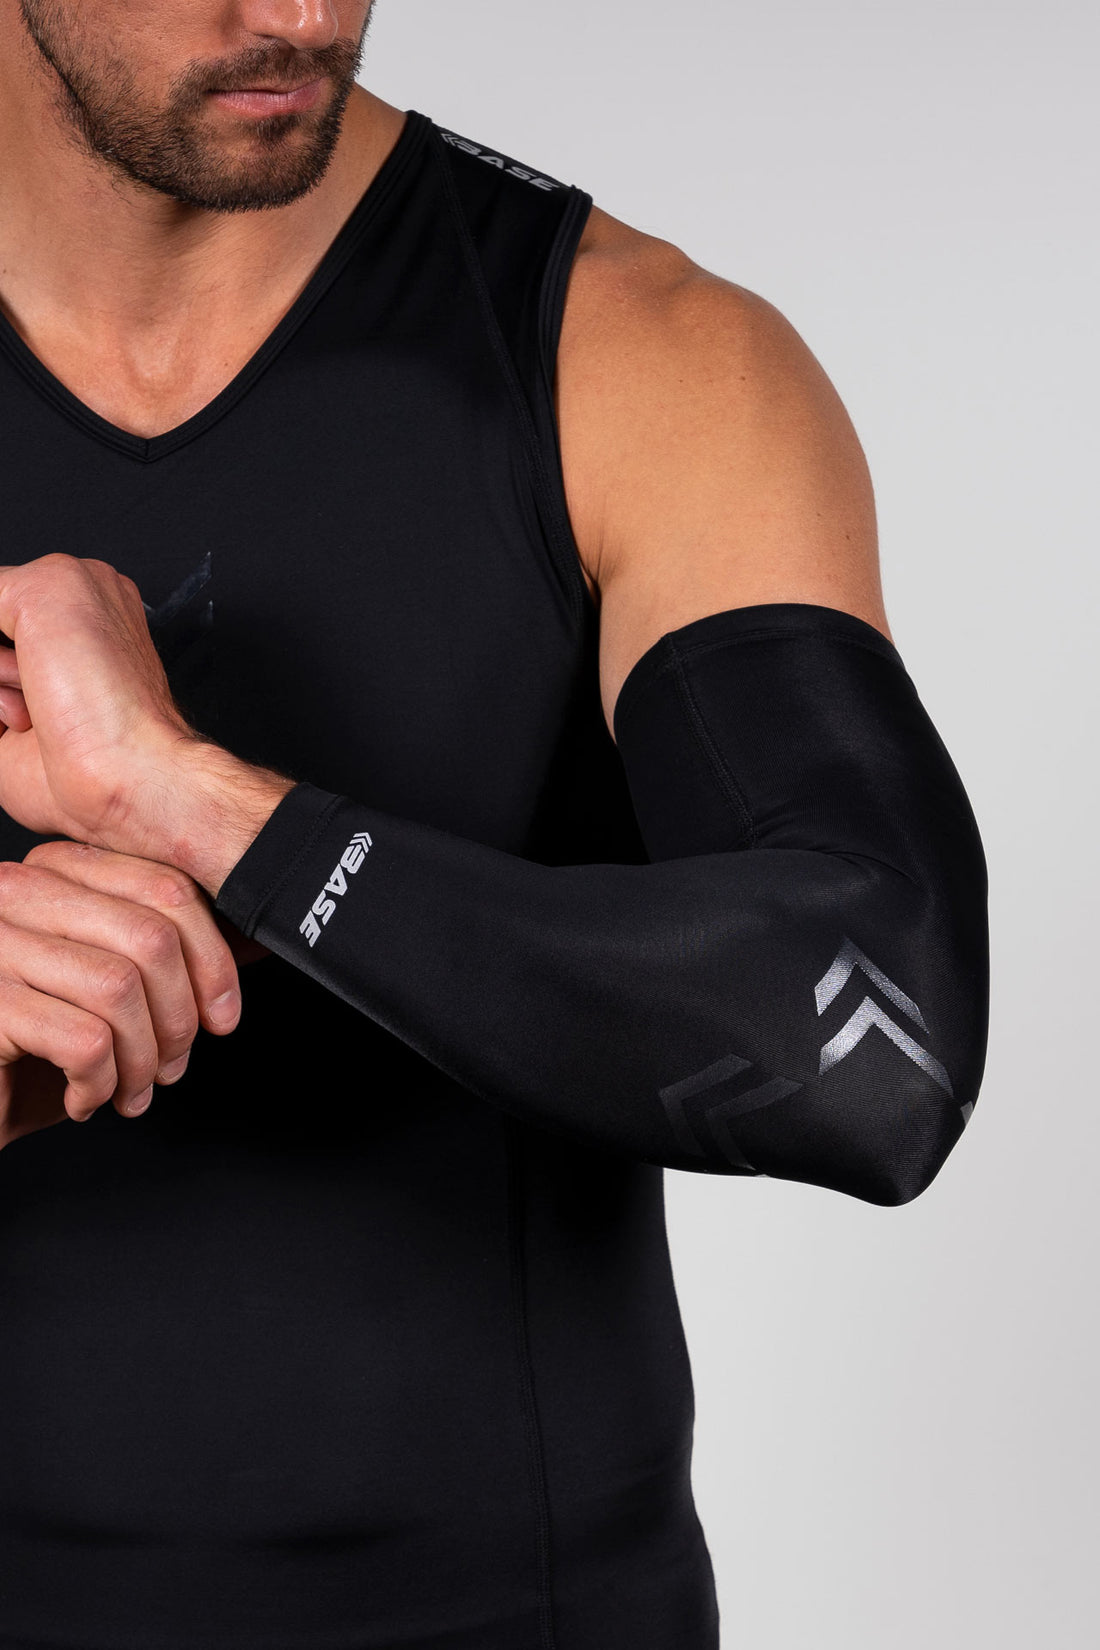 Premium Compression Arm Sleeves For Sport